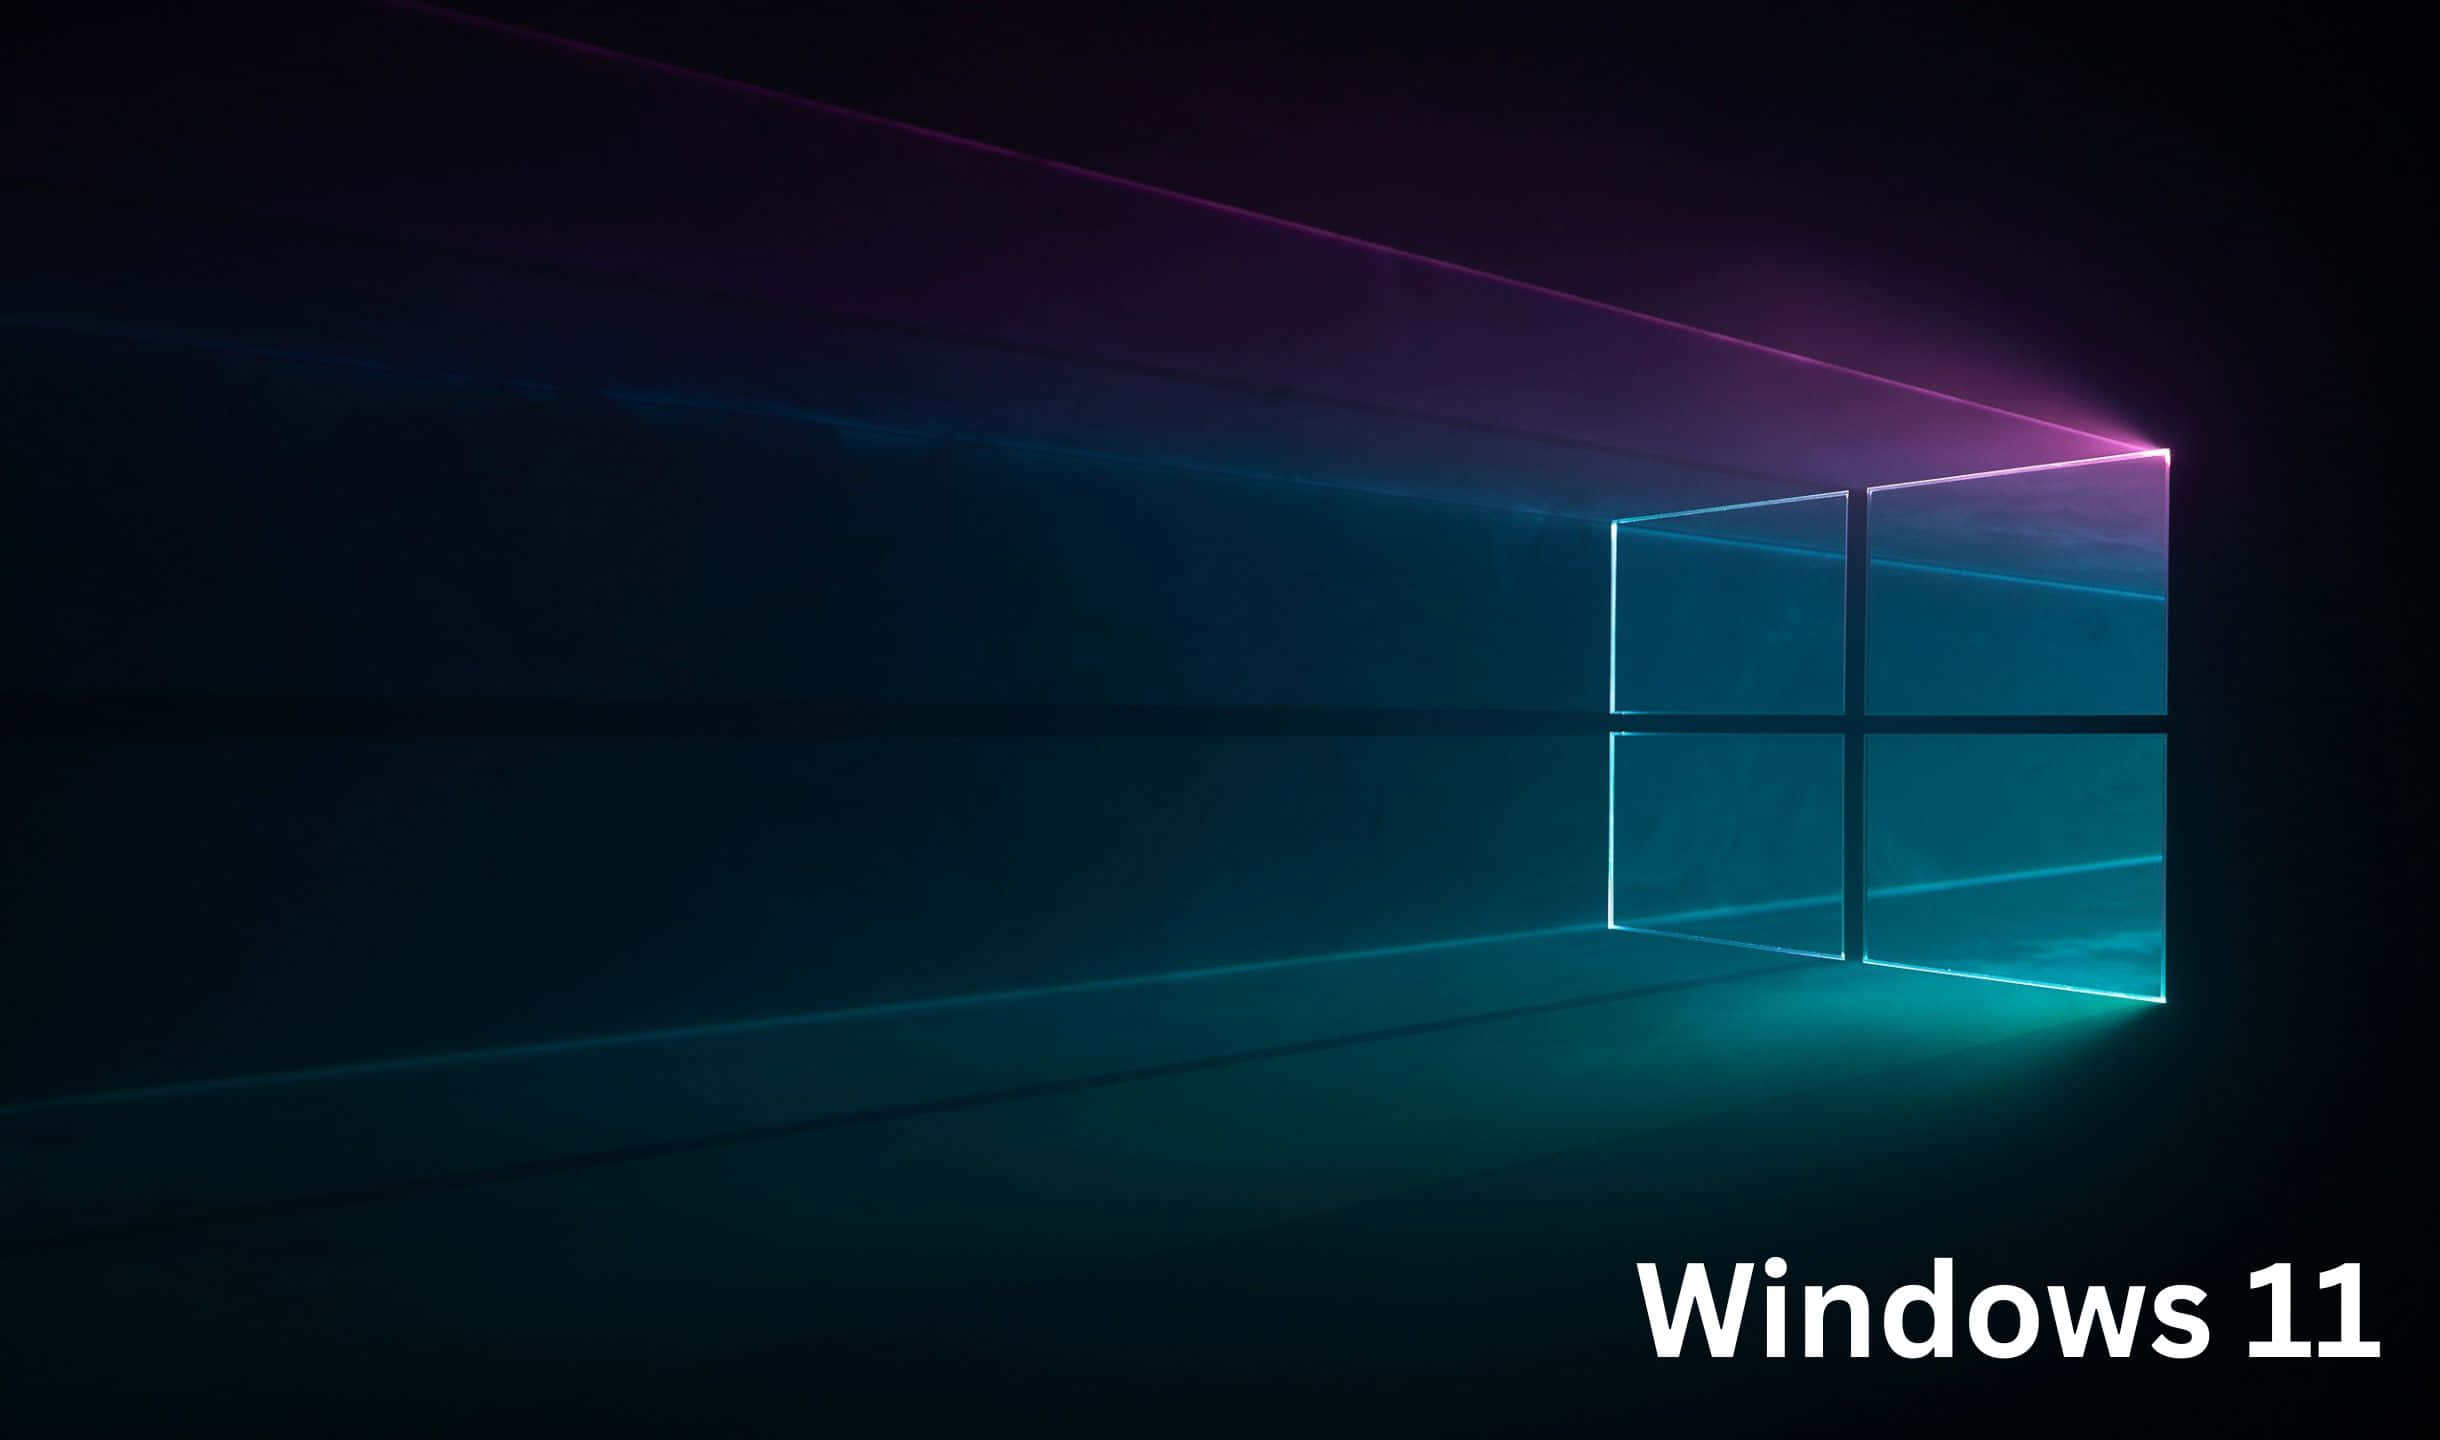 Experience the power of Windows 11 with its latest features